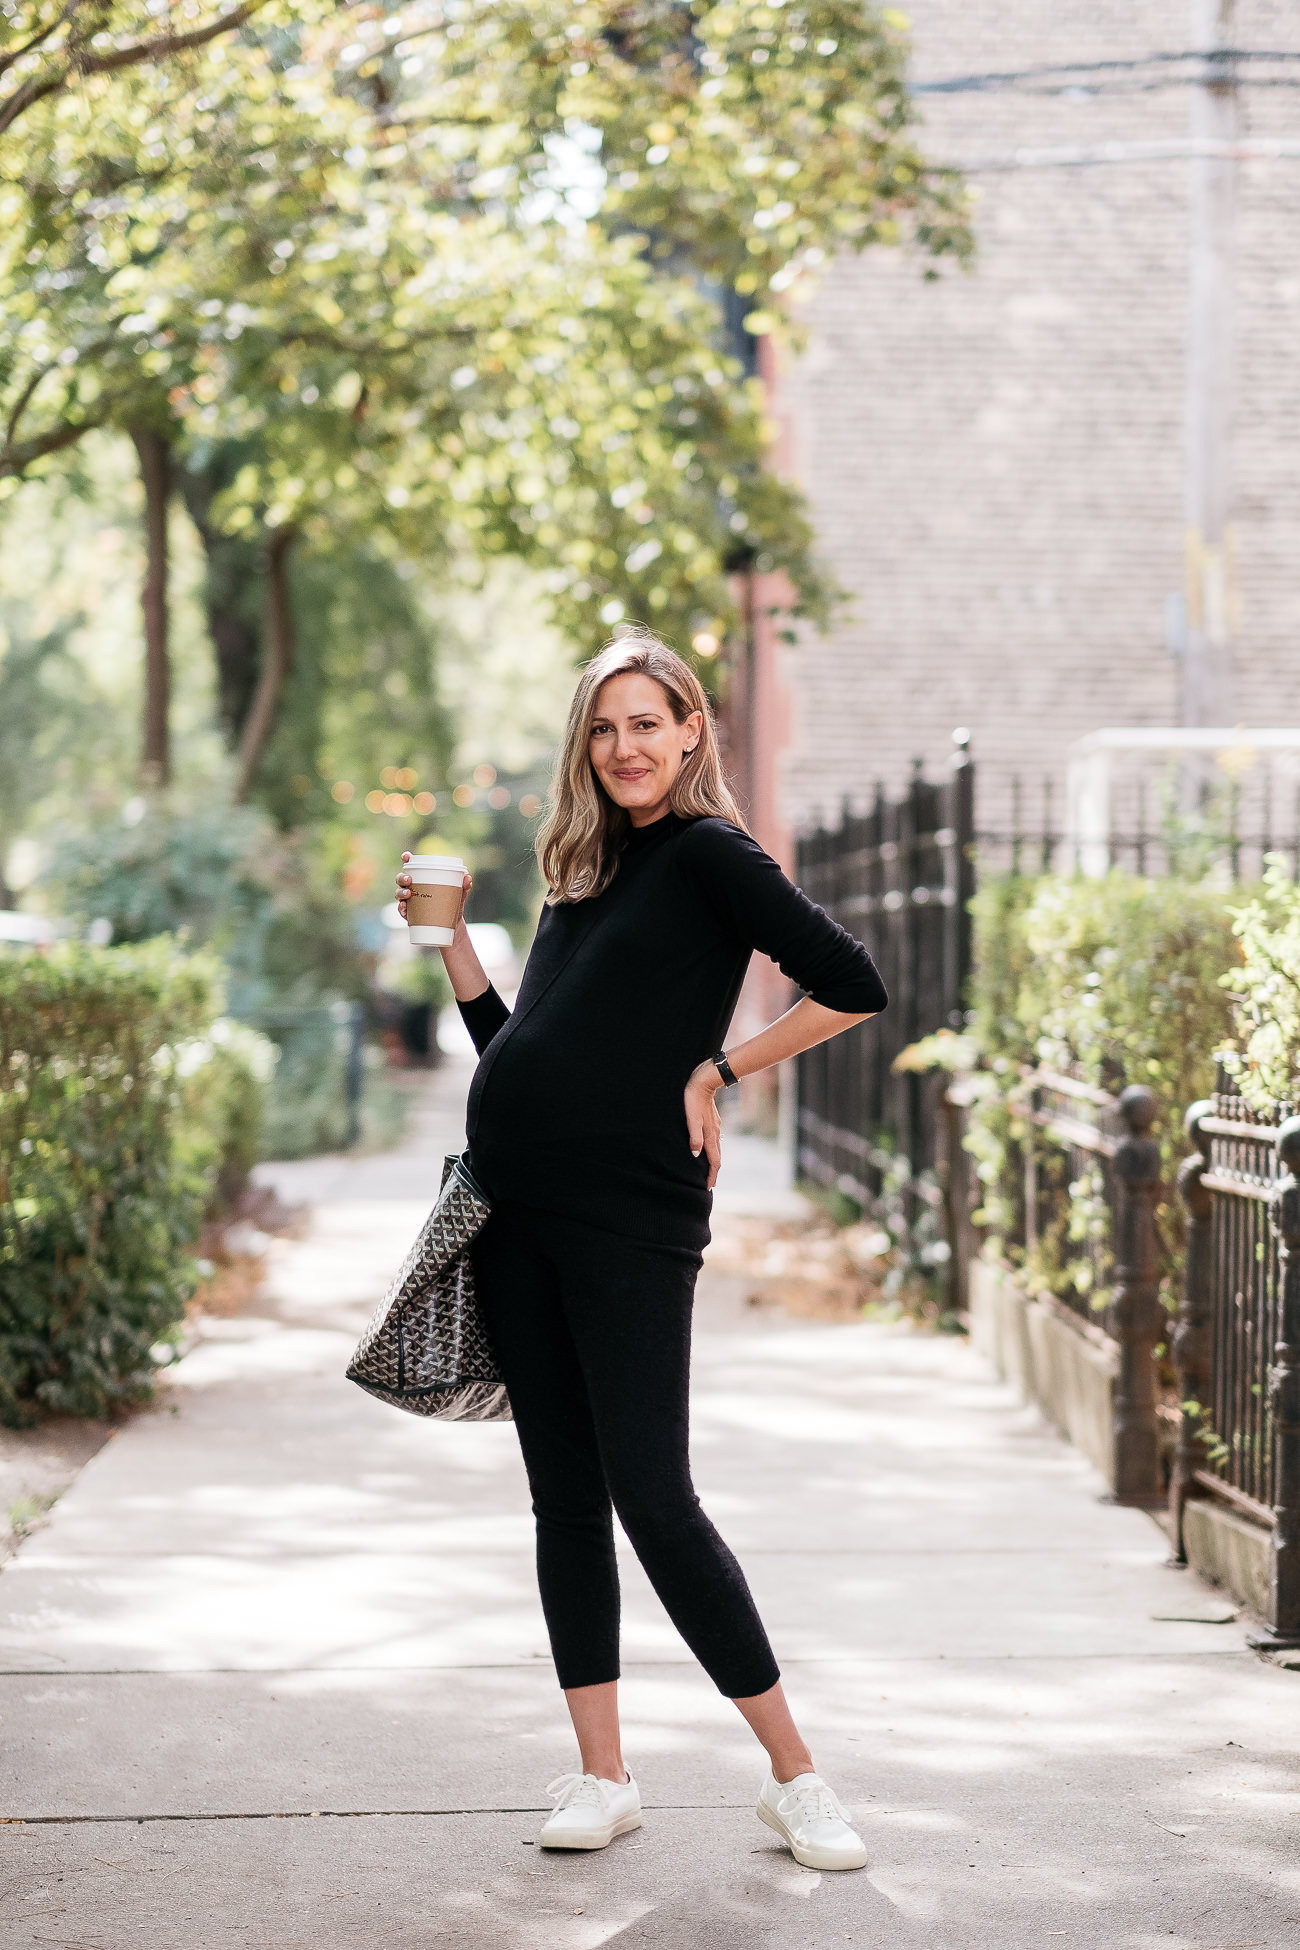 woman wearing all black outfit from Banana Republic and holding a drink